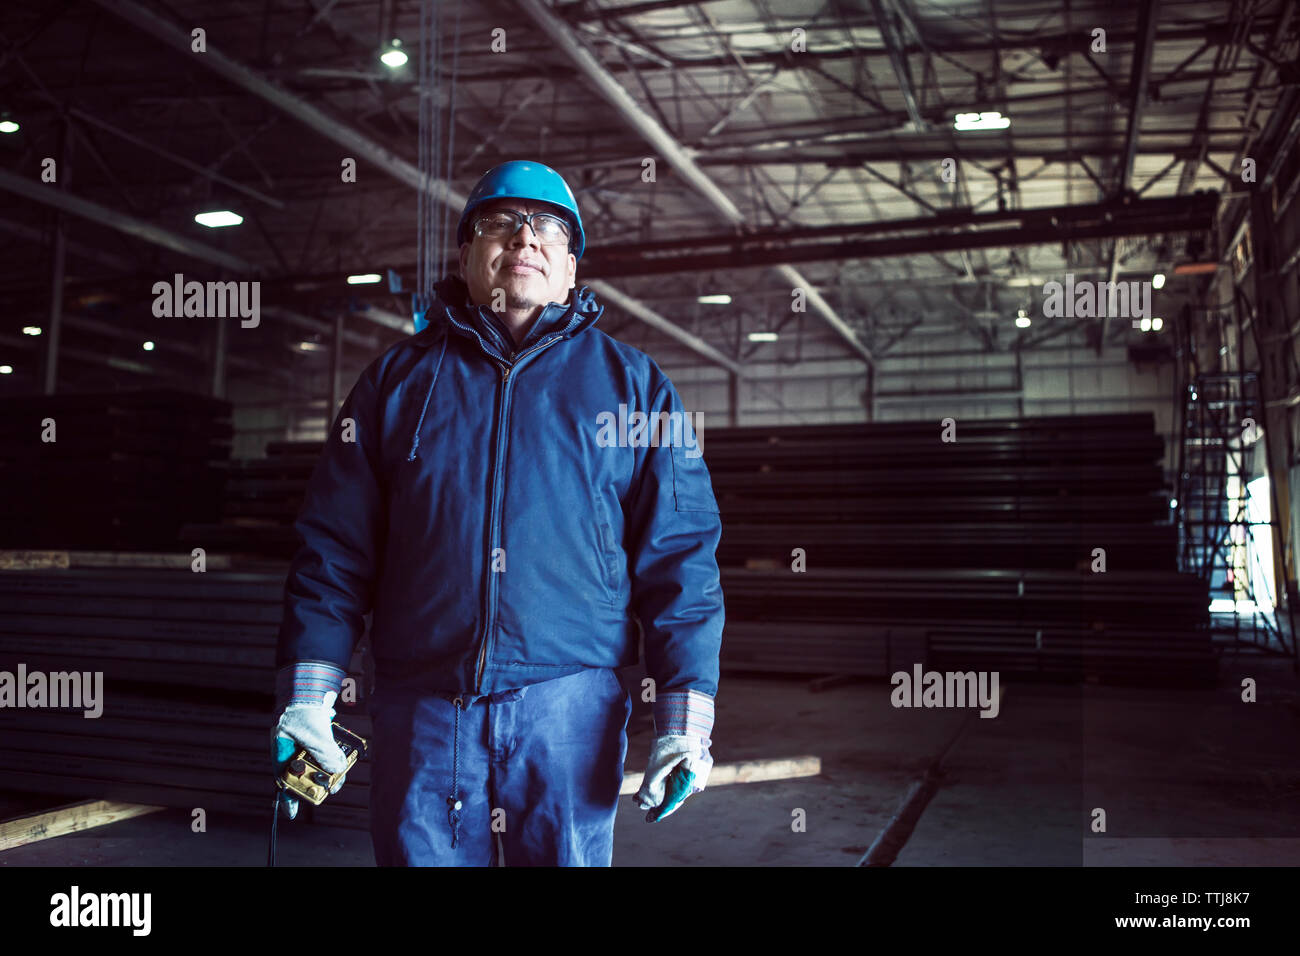 Portrait of worker holding remote control standing in factory Stock Photo